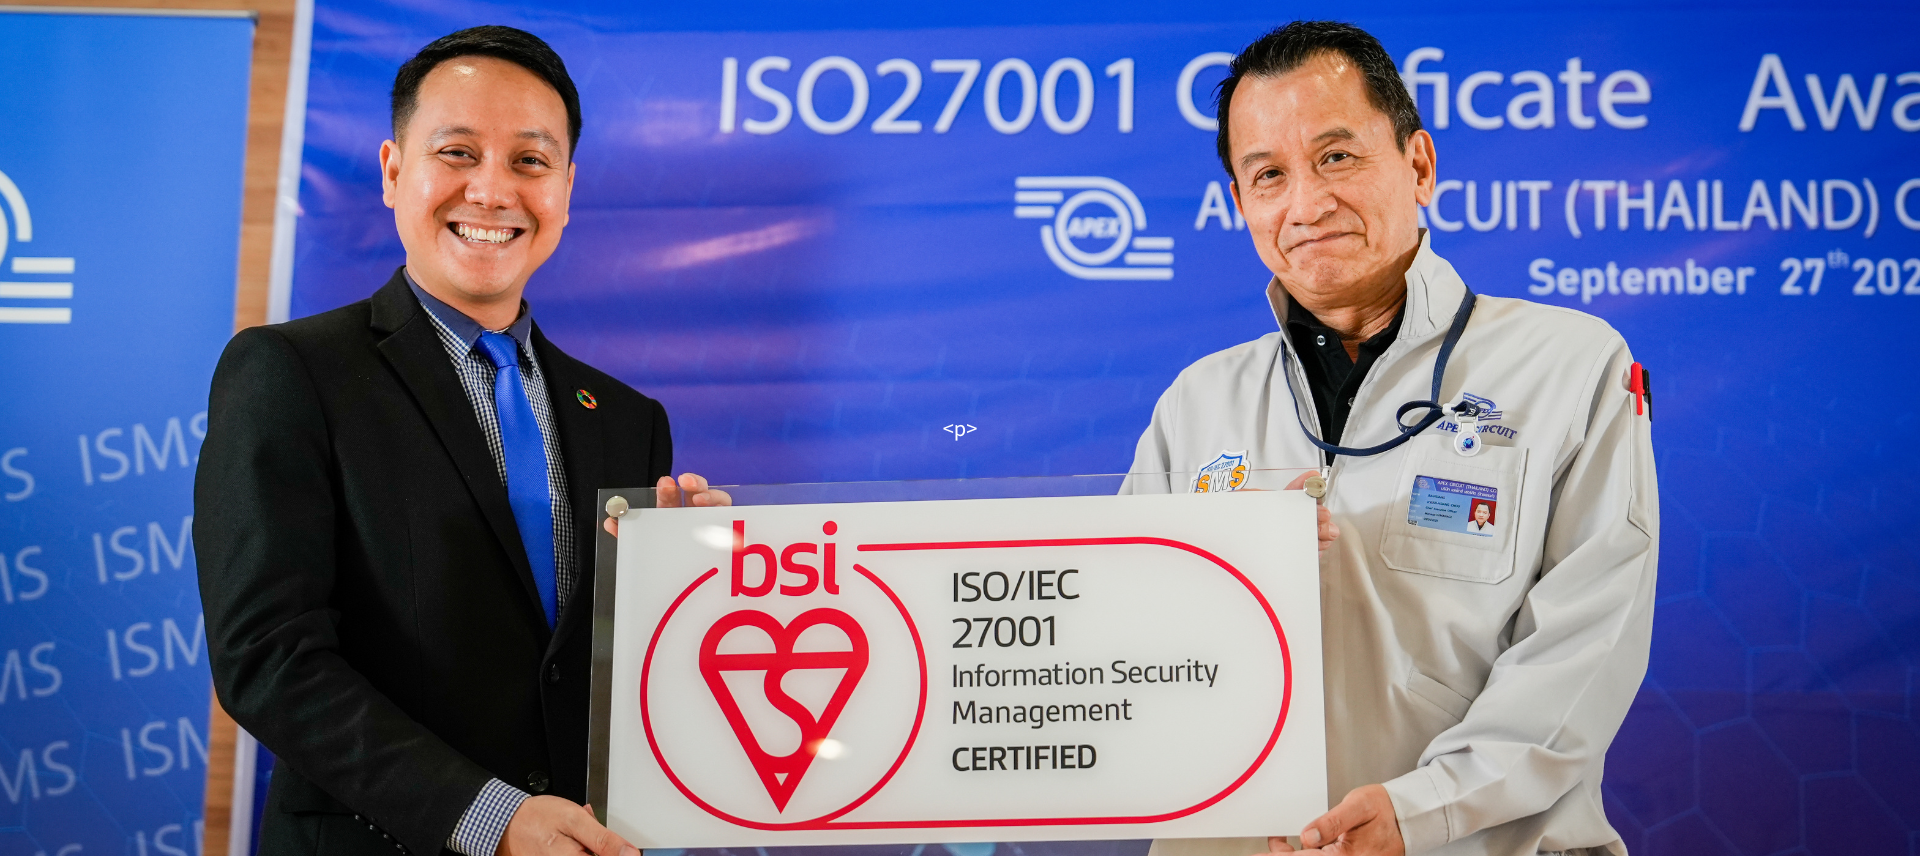 Apex has obtained the ISO/IEC 27001 certification, aligning with international security standards.